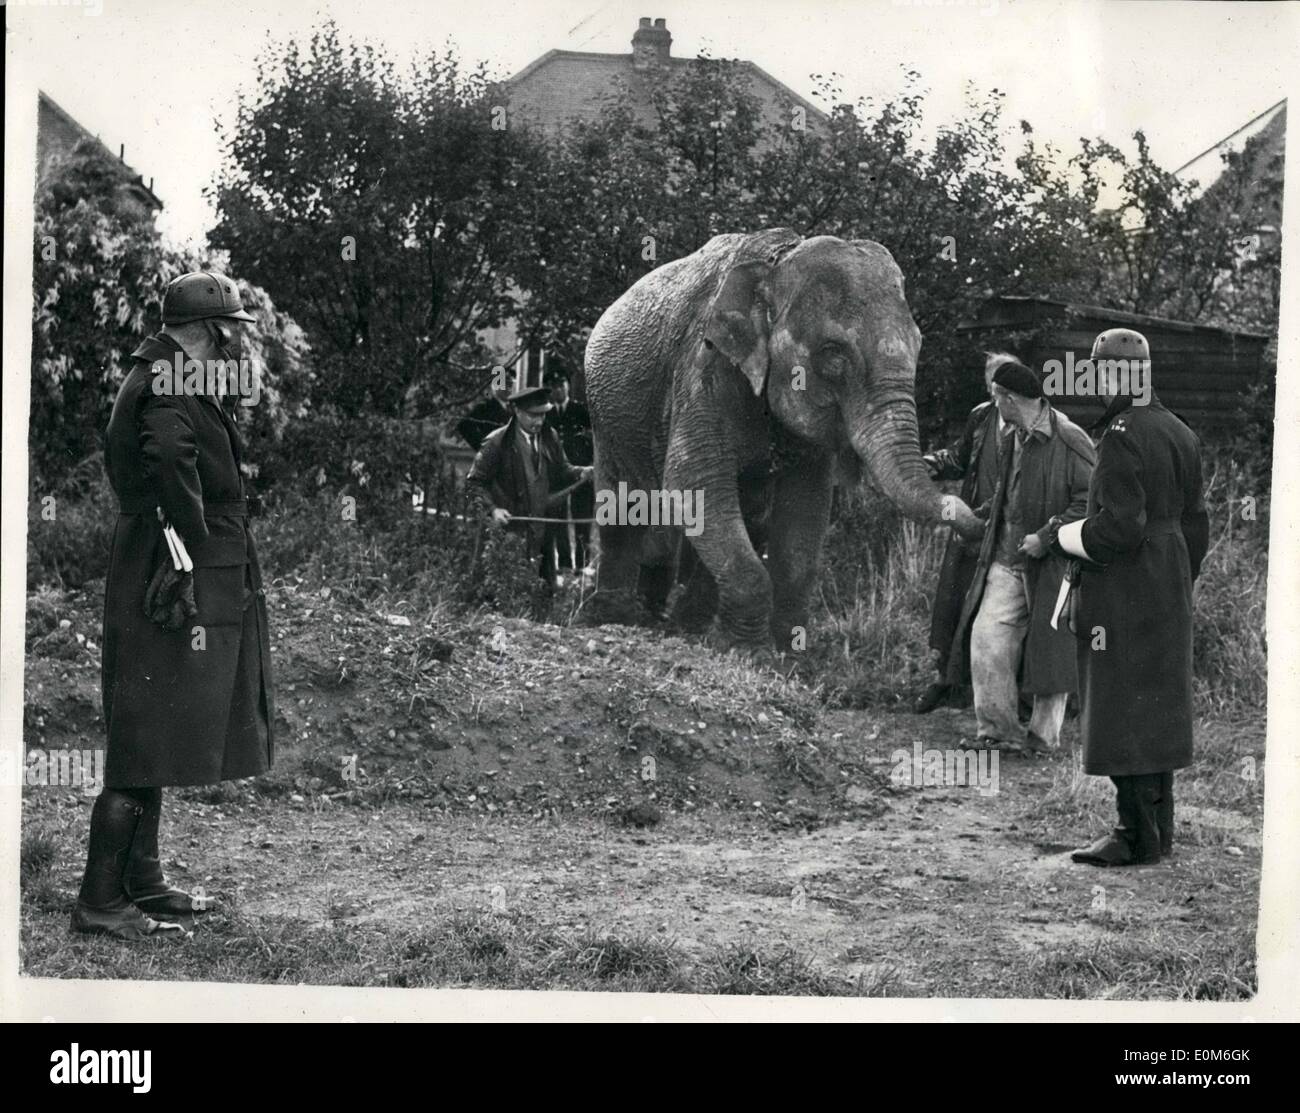 Sep. 09, 1953 - Elephant at the bottom of his garden. Juno likes a spot of fruit.: When Mr.Alex Smith, an accountant, awoke at his home in Smerset Avenue, Hock, Surrey, this morning he could bot believe hie eyed - at the bottom of his garden was a real live elephant - munching apples. The elephant was Juno a 10 ff. high female circus elephant when went off for a walk on her own when being taken from Chessington Zoo - along the Kinston By-Pass so board a train at Esher - fro Brighton. She was soon brought into line once again. Photo shows after having her fill of fruit in Mr Stock Photo